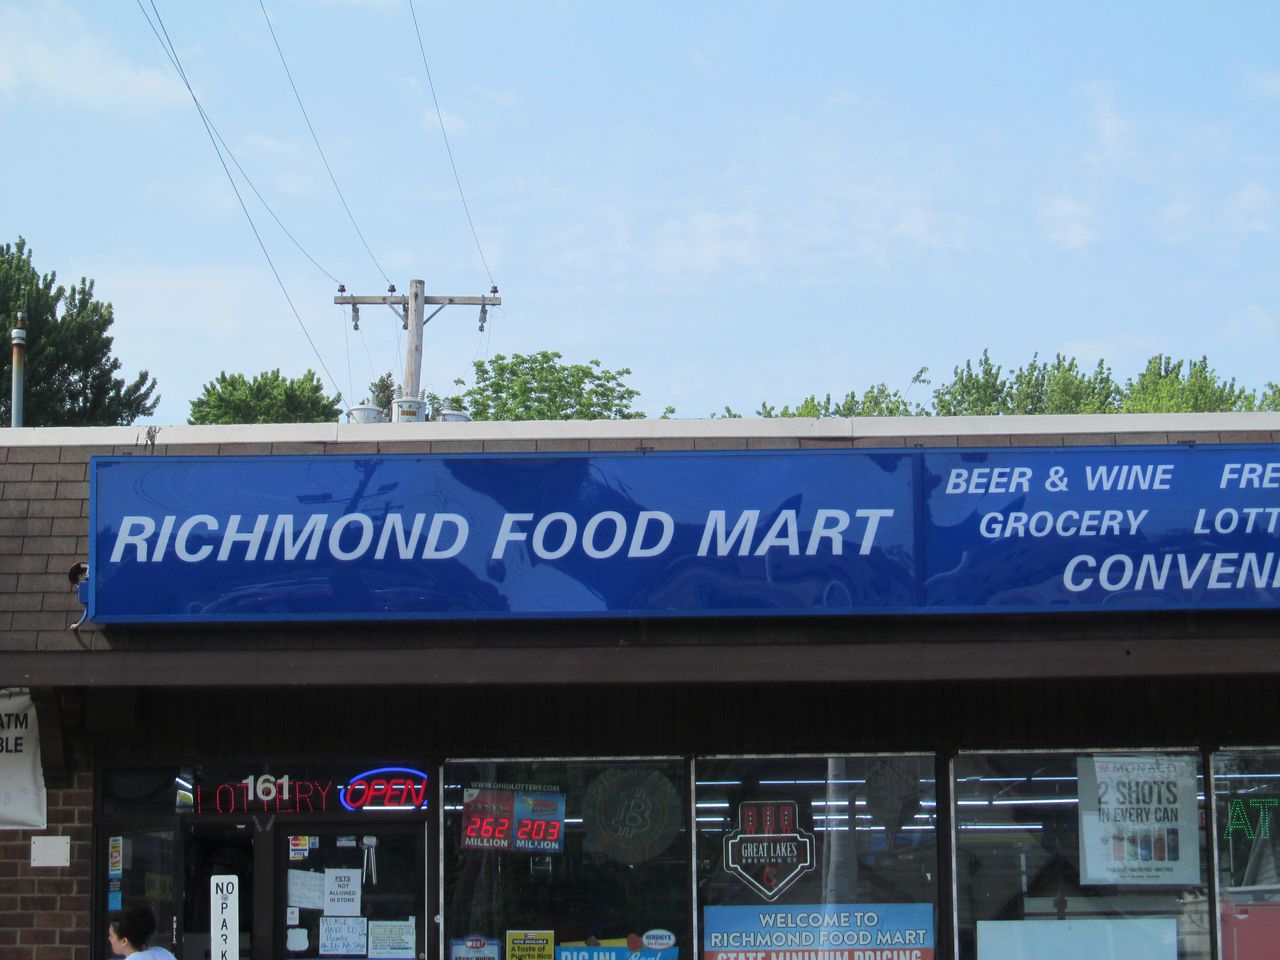 Richmond Food Mart has one of the highest health inspector violation counts in Lake County.